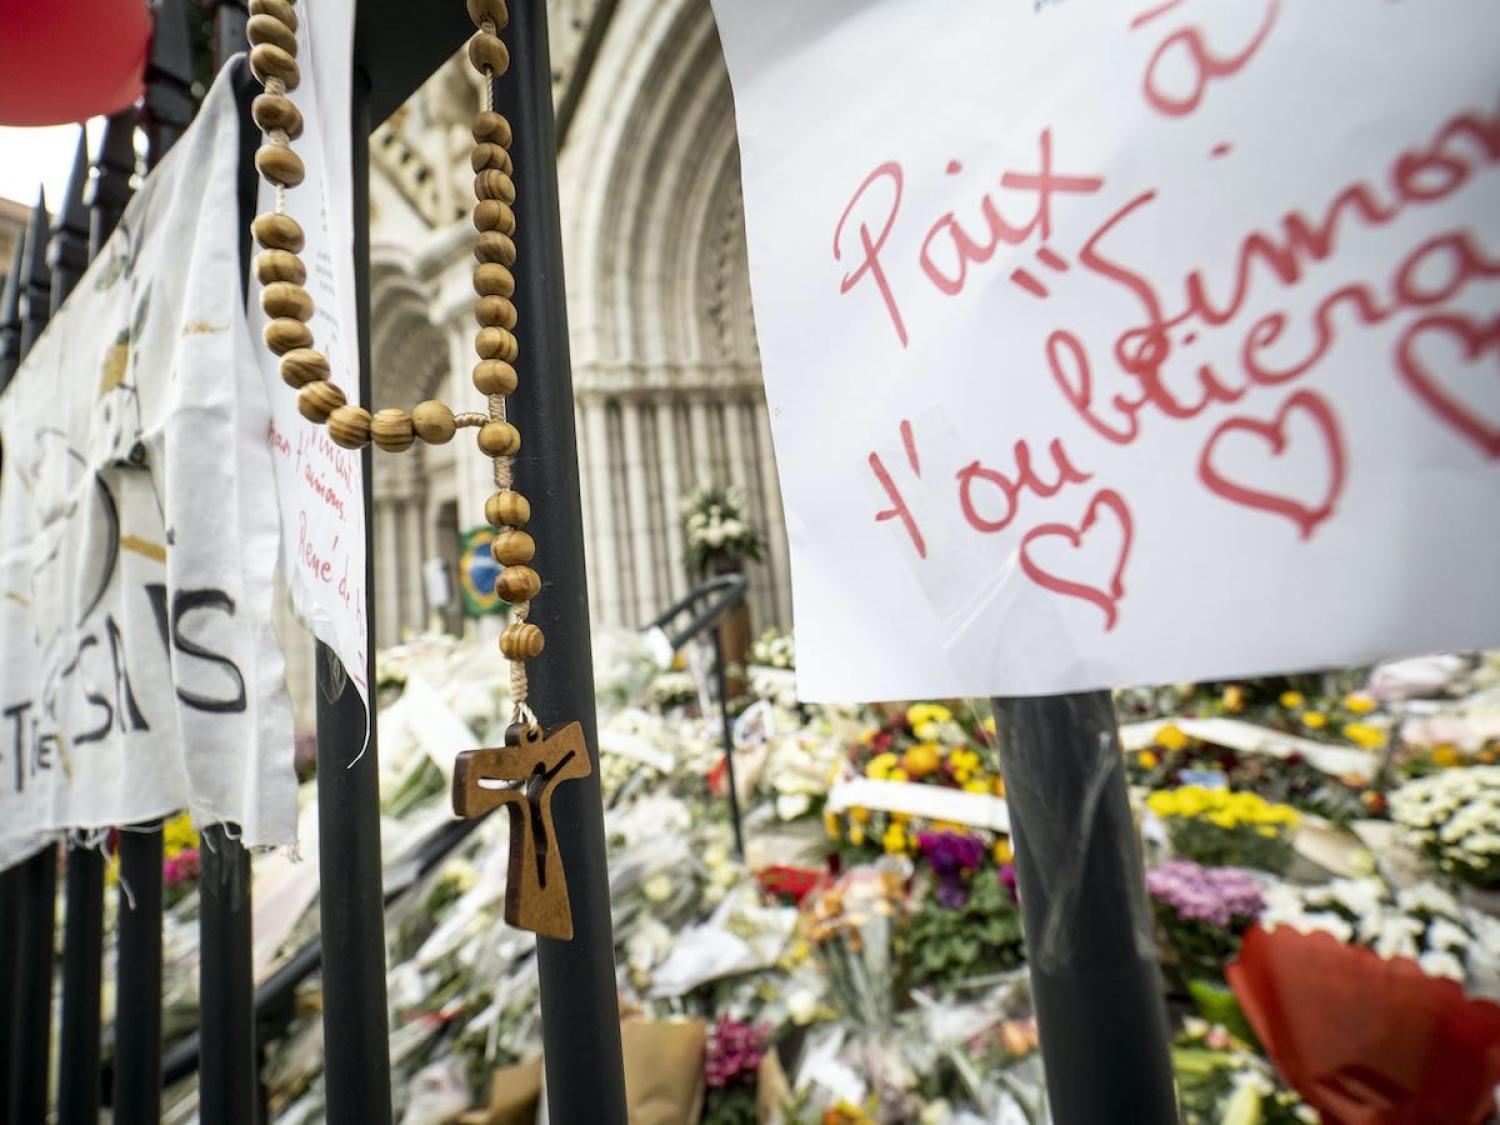 Memorials outside Notre Dame Basilica in Nice, France following the fatal stabbing of three people on 29 October (Arnold Jerocki/Getty Images)